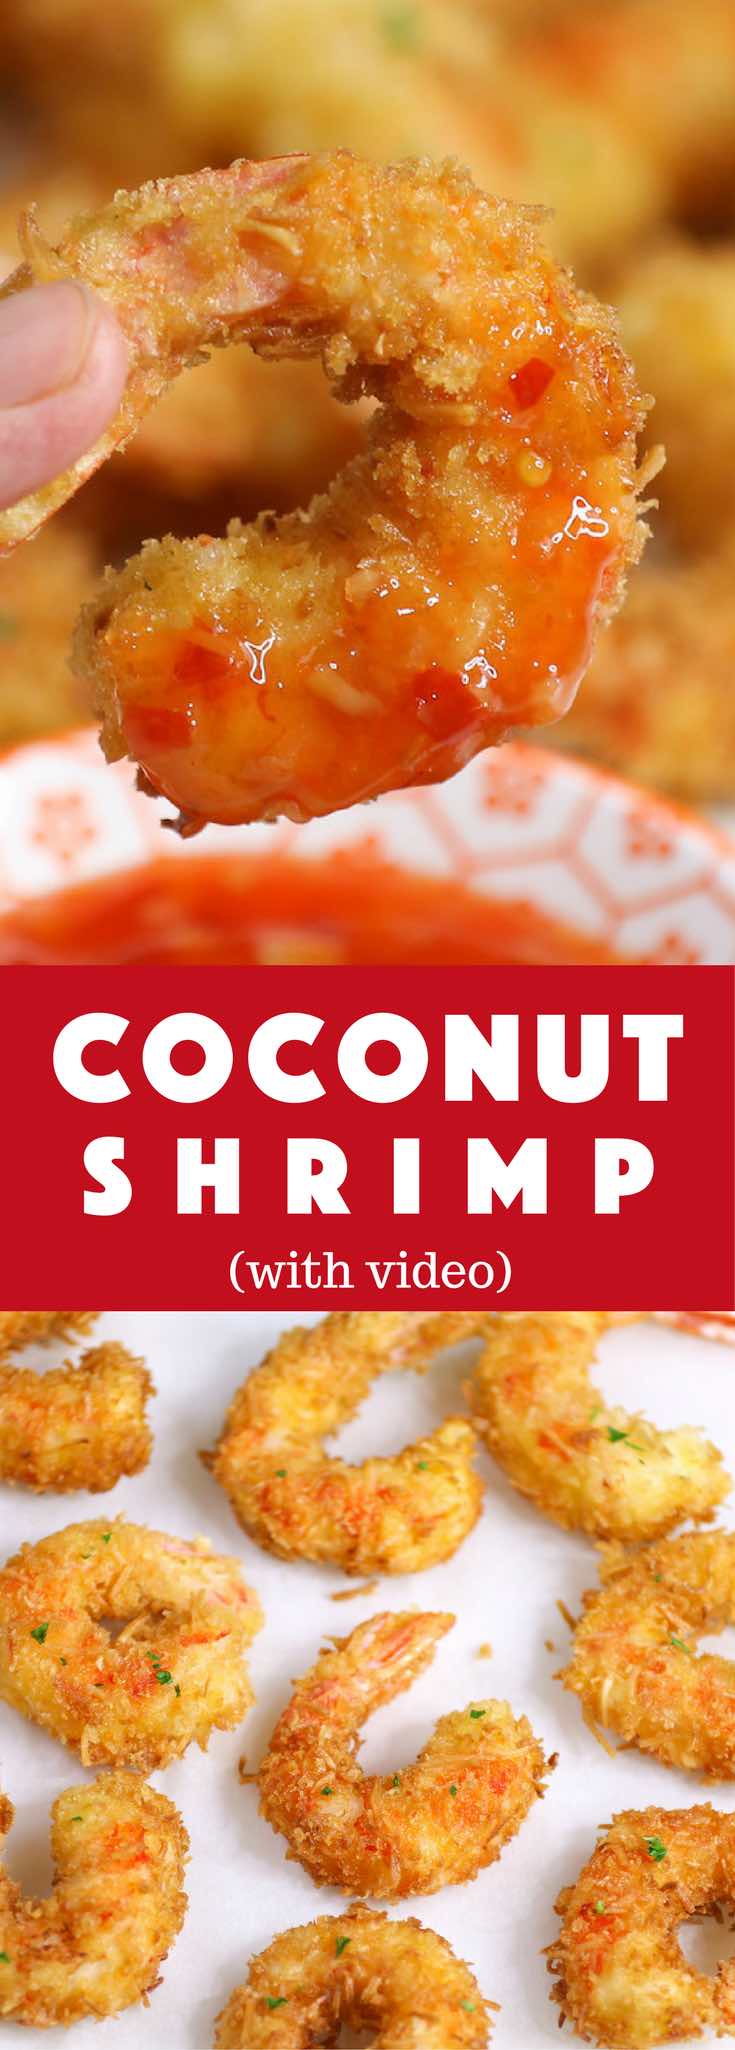 These Coconut Shrimp make an irresistible appetizer that’s tender on the inside, and crispy, sweet and crunchy on the outside. They’re mouthwateringly delicious and will be the first to go at a party! 